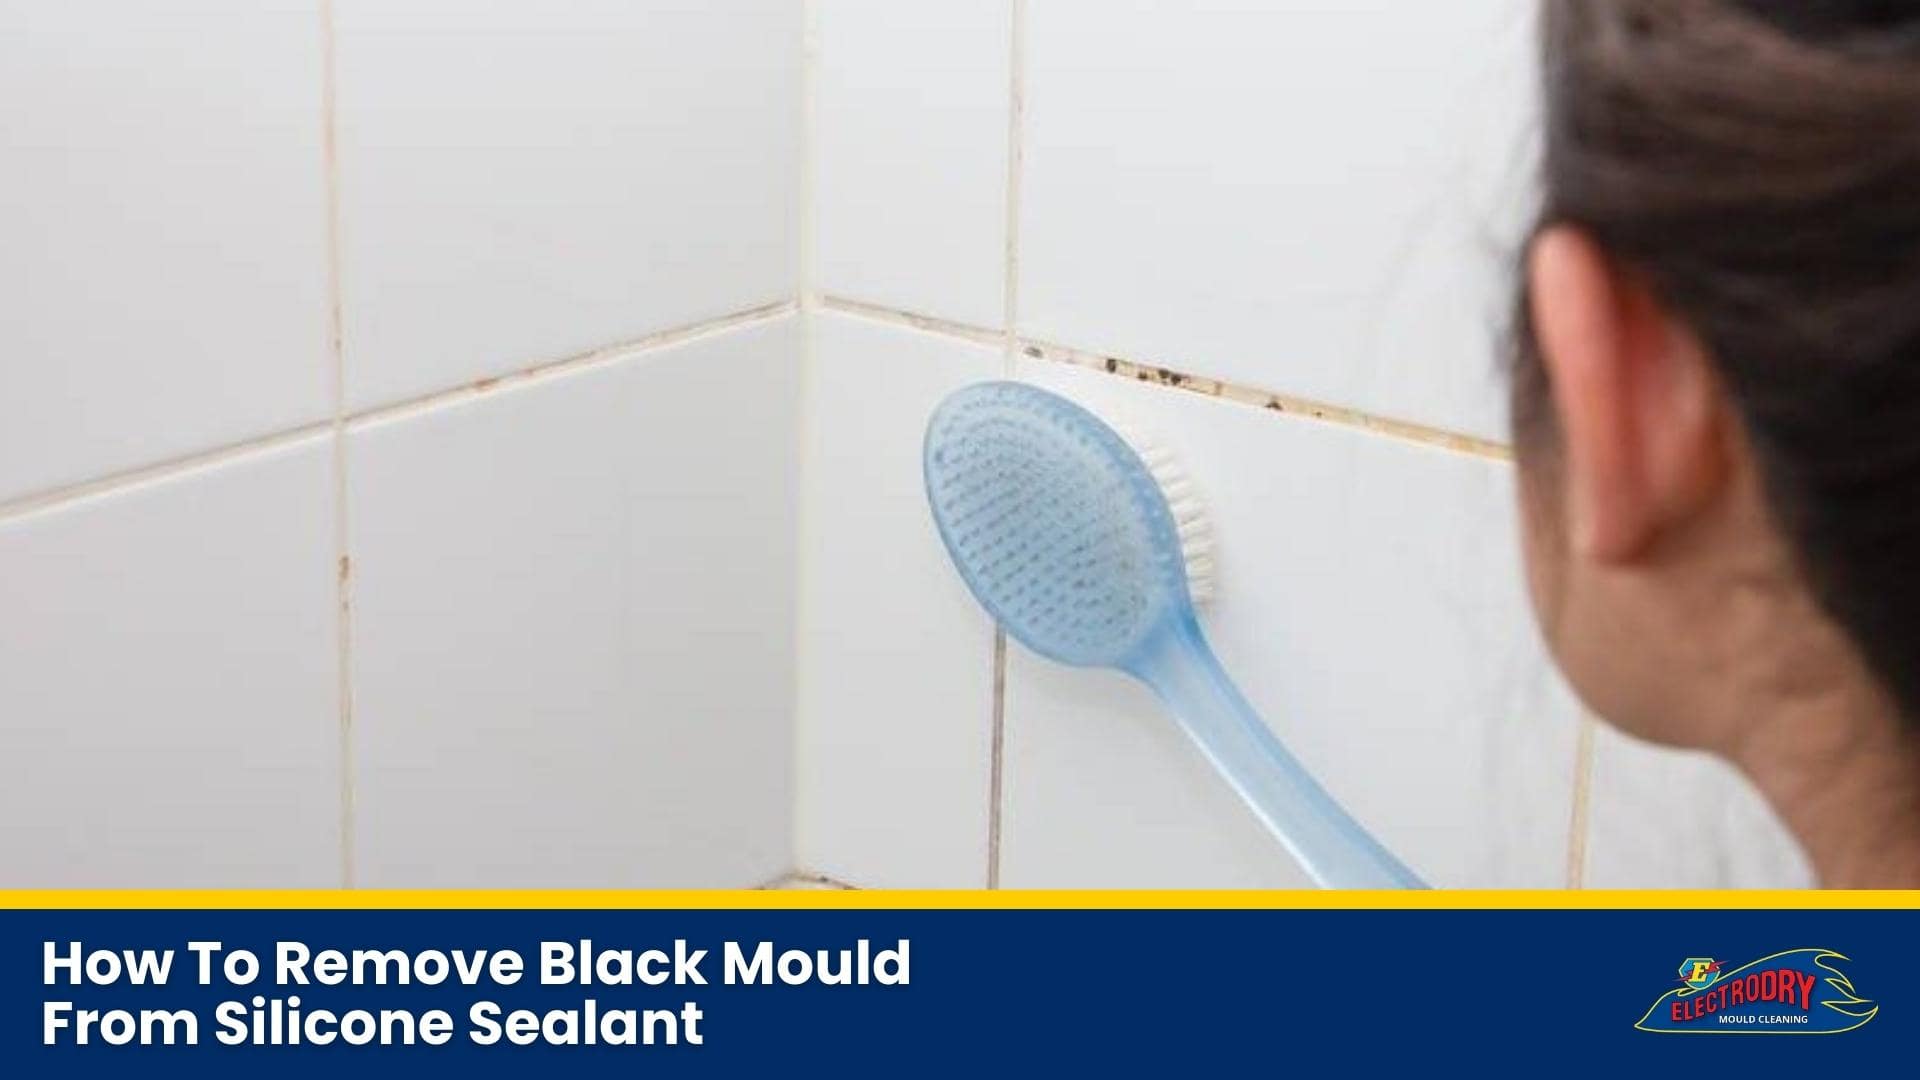 How To Remove Black Mould From Silicone Sealant